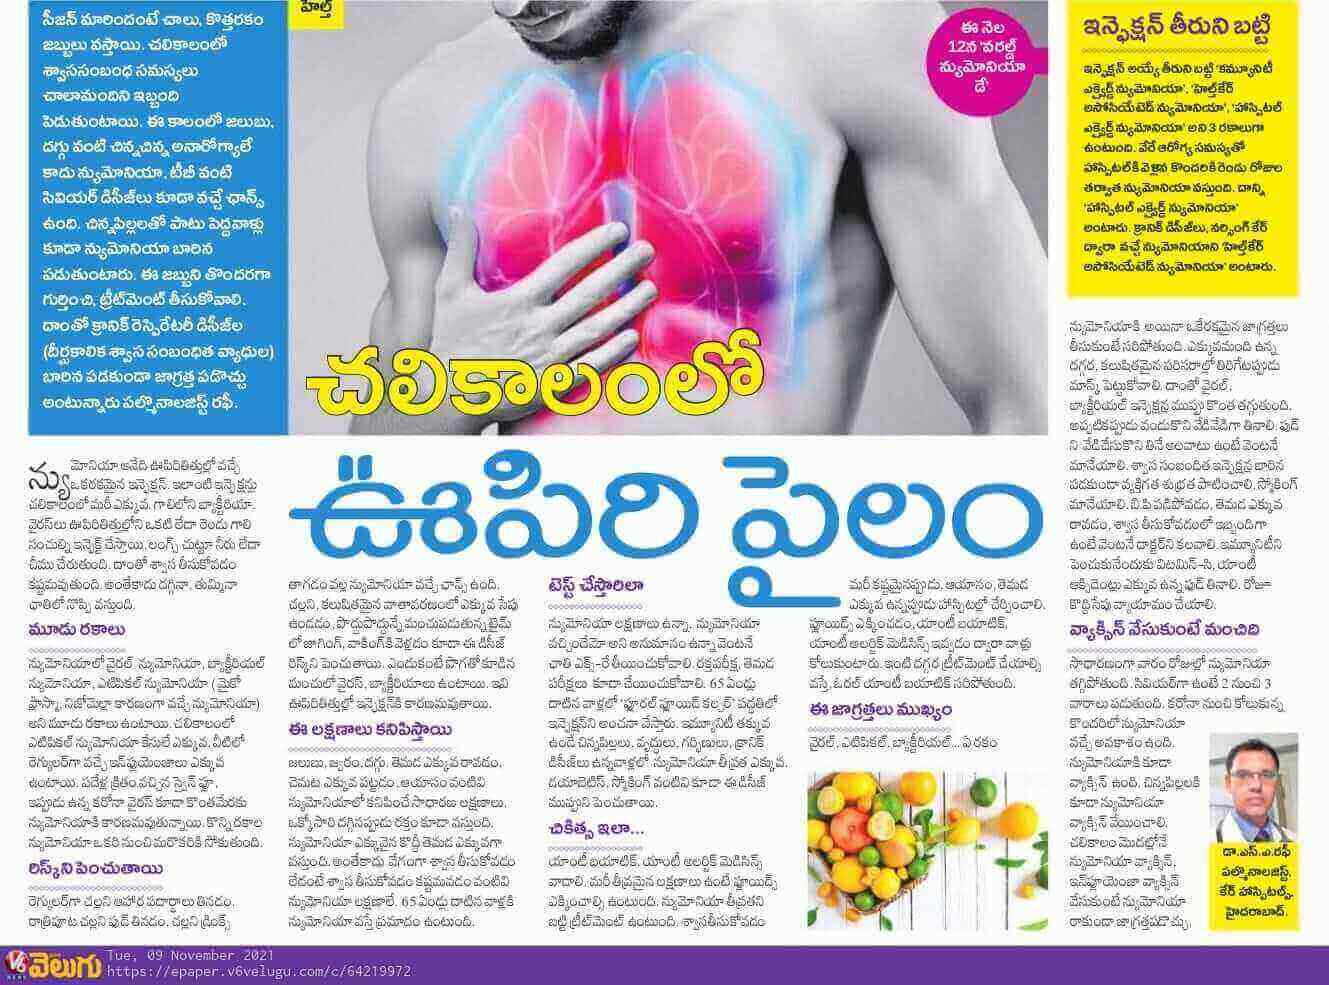 Article on Pneumonia by Dr. S A Rafi - Consultant Pulmonologist